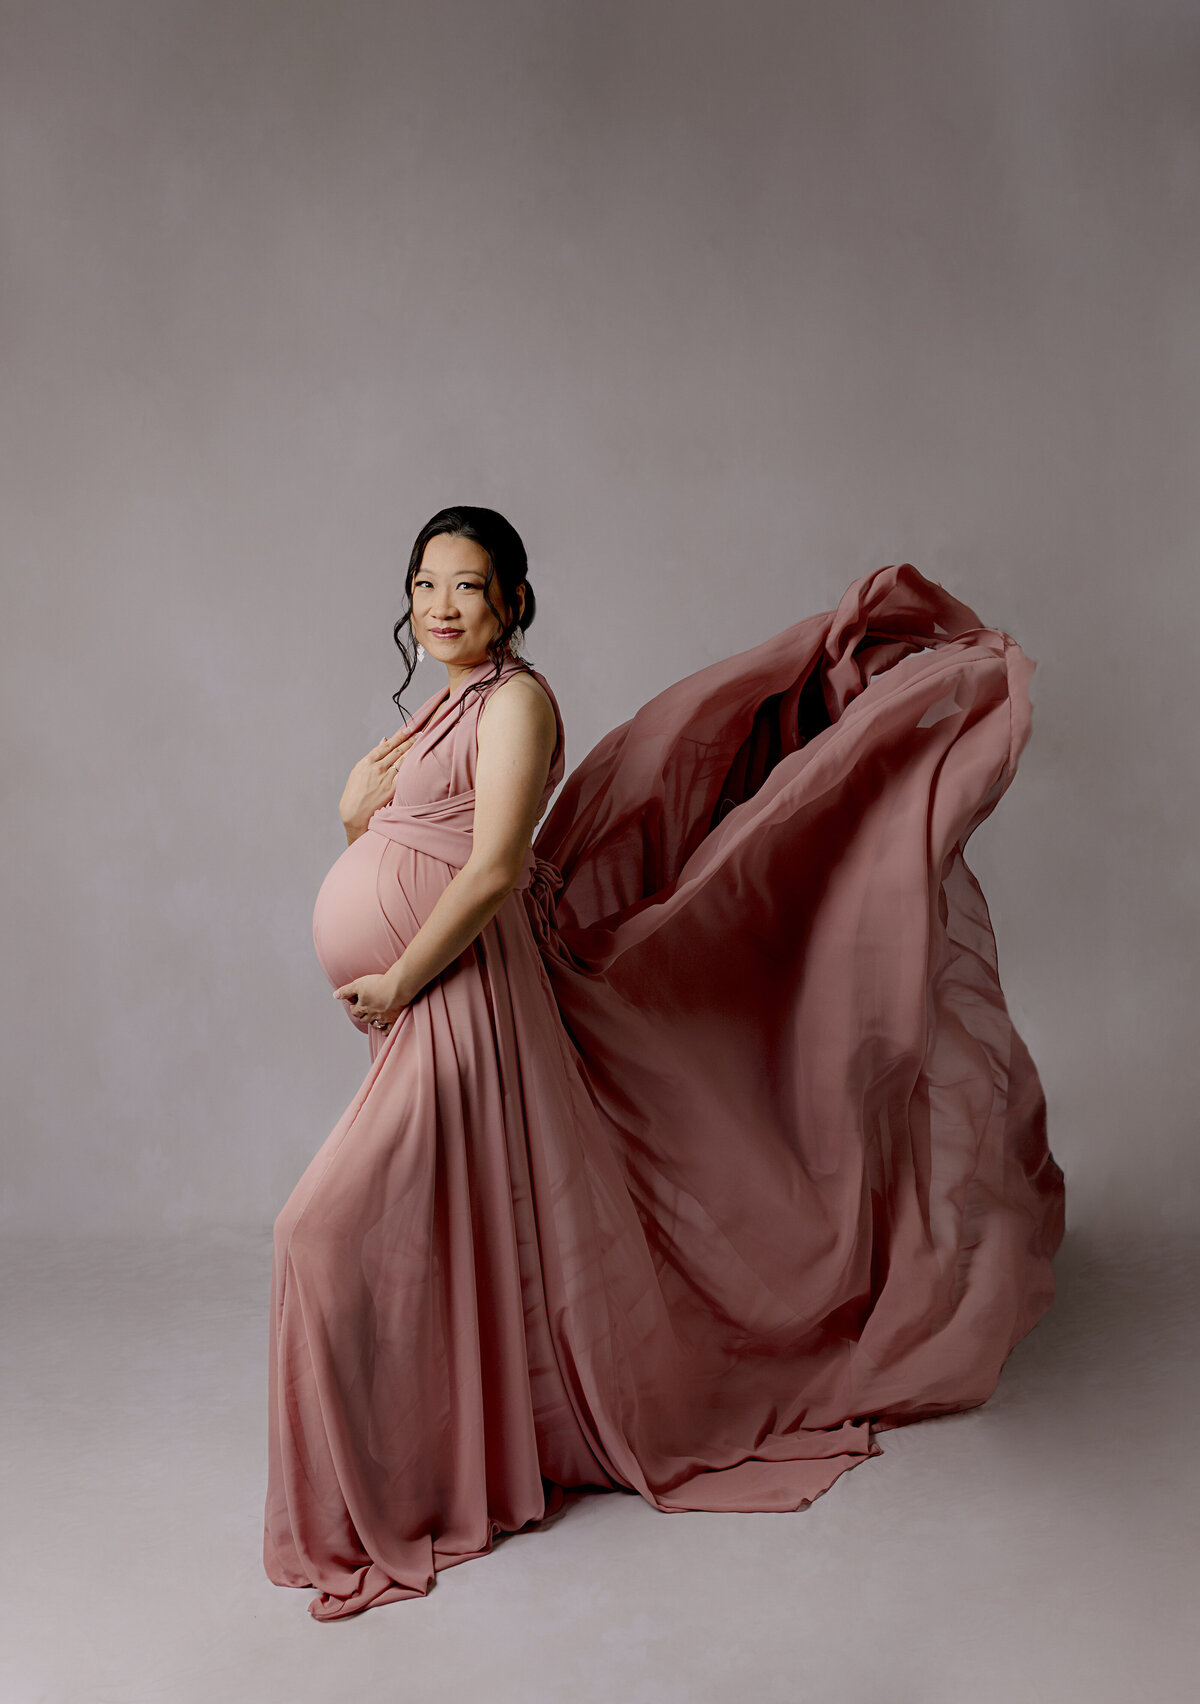 mother in pink dress holding pregnant stomach